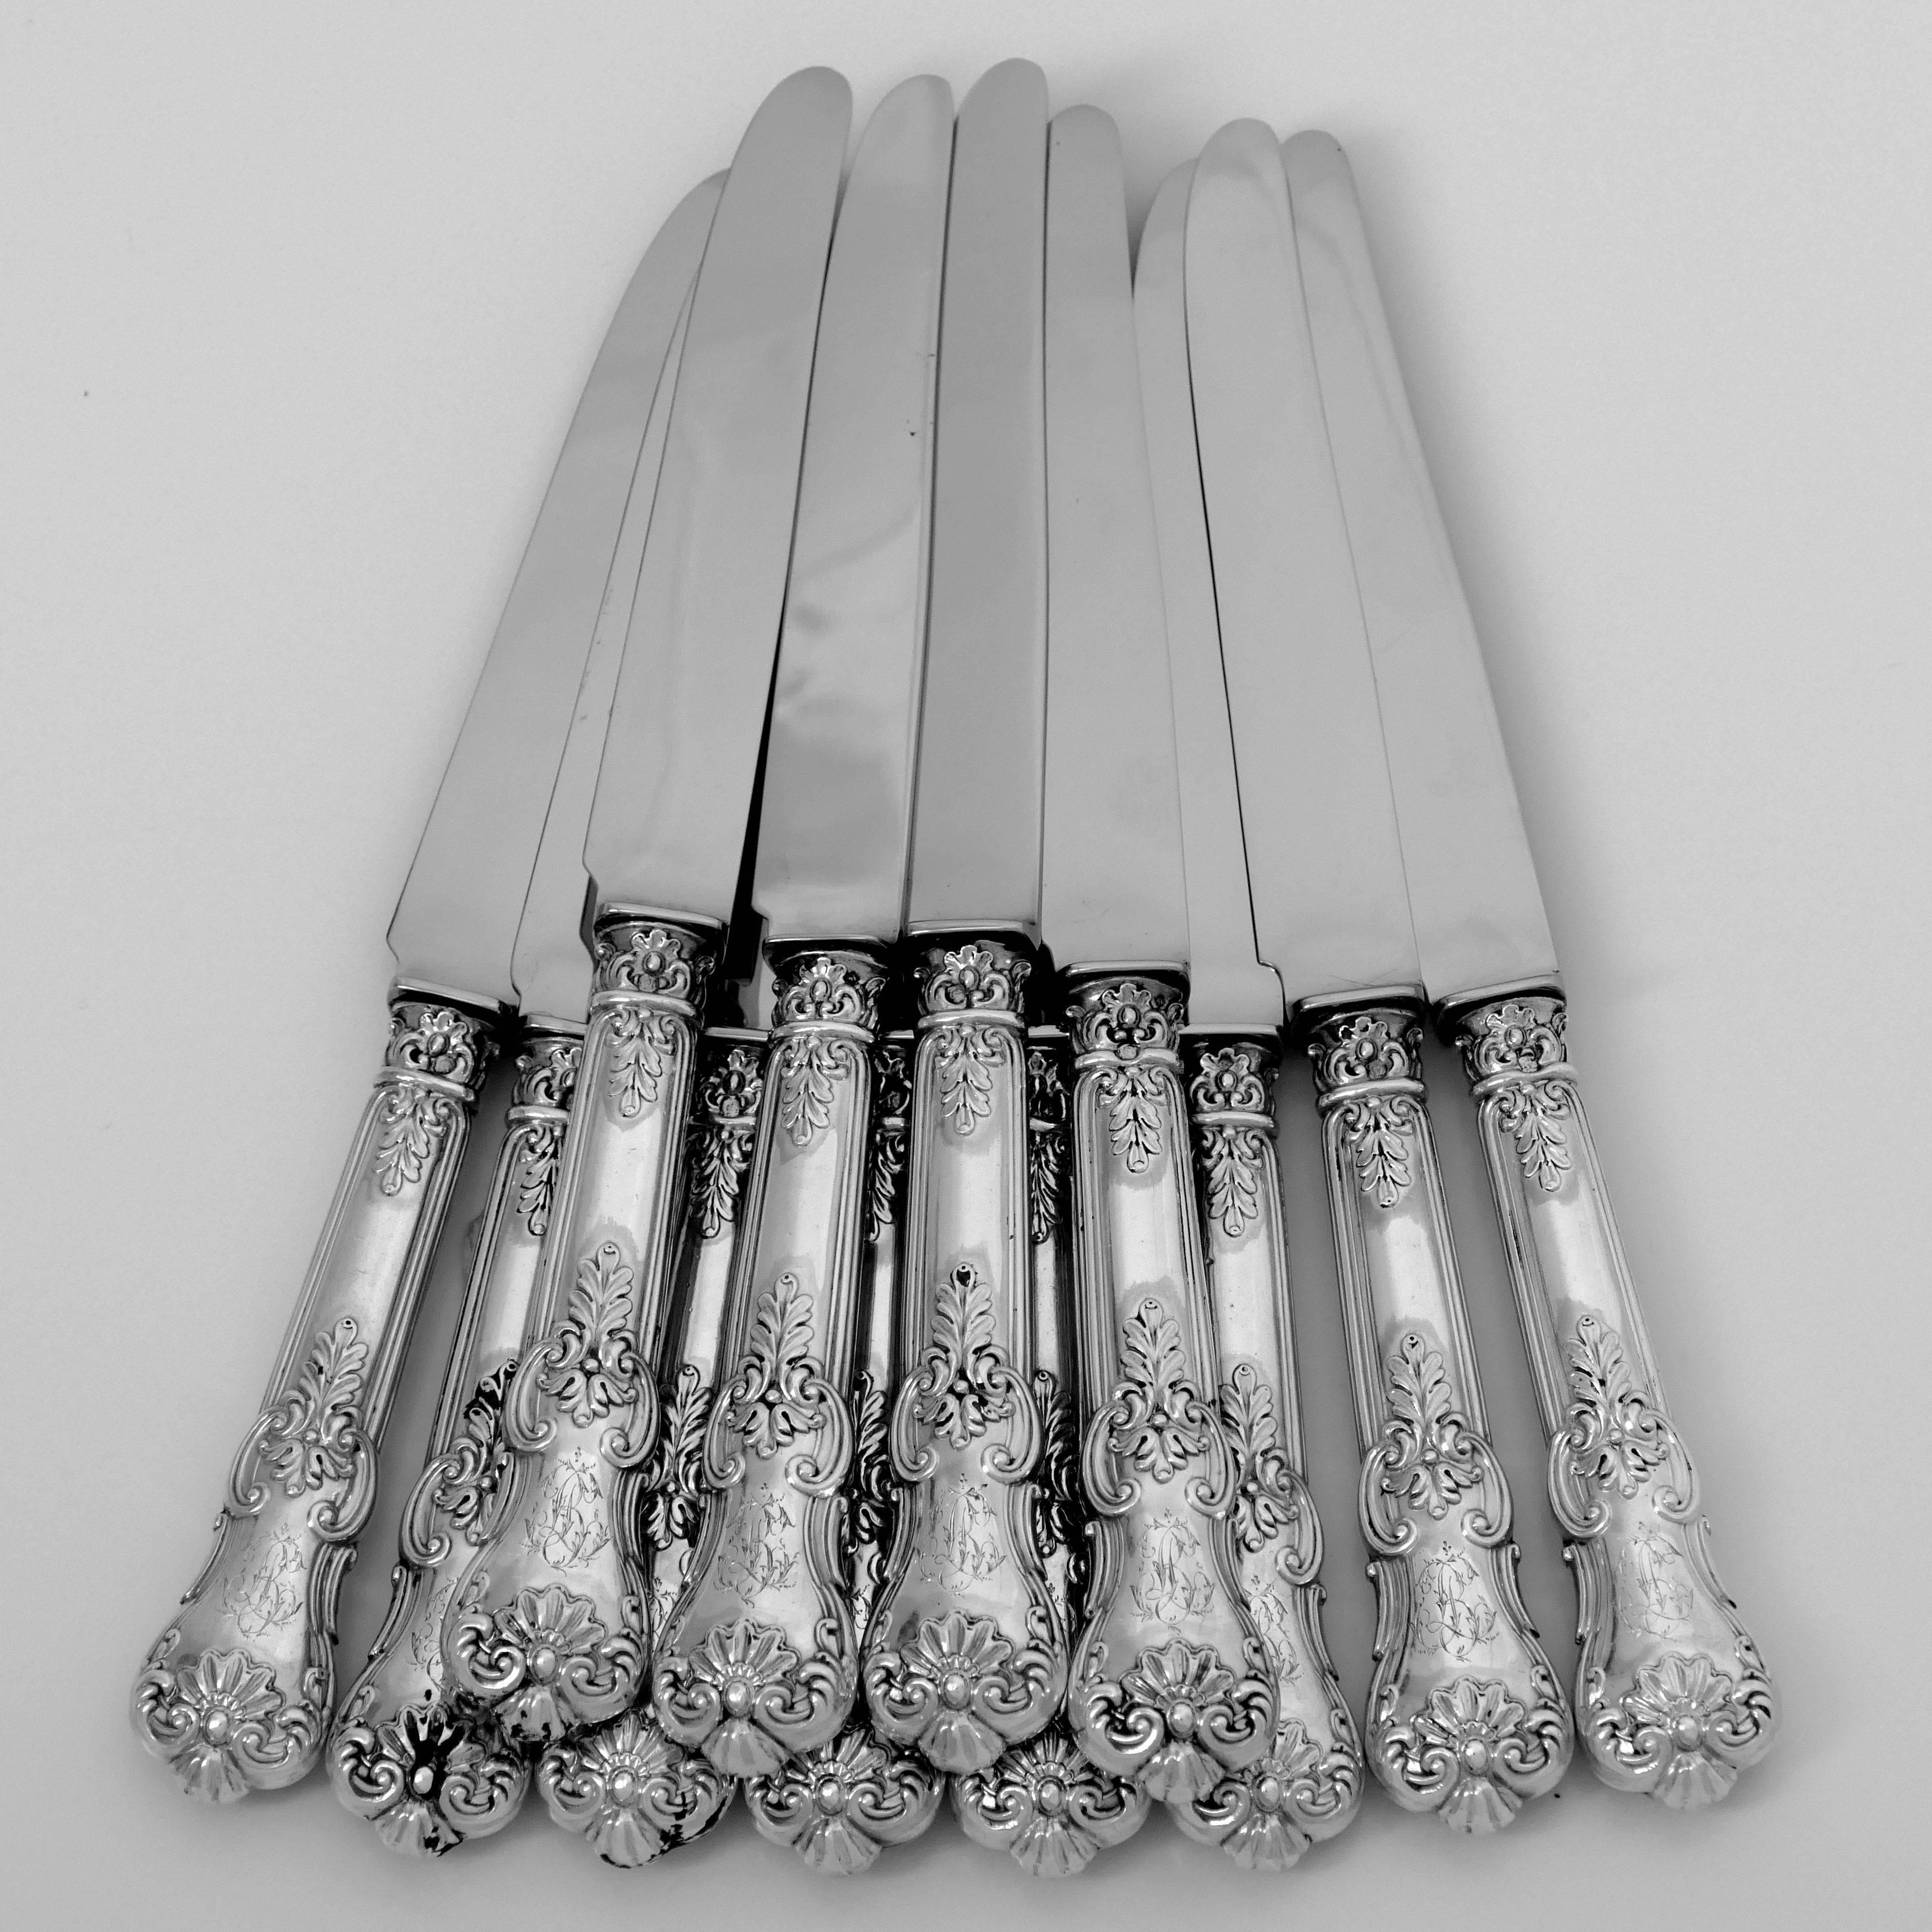 Mid-19th Century Antique French Sterling Silver Dinner Knife Set 12 Pc New Stainless Steel Blades For Sale